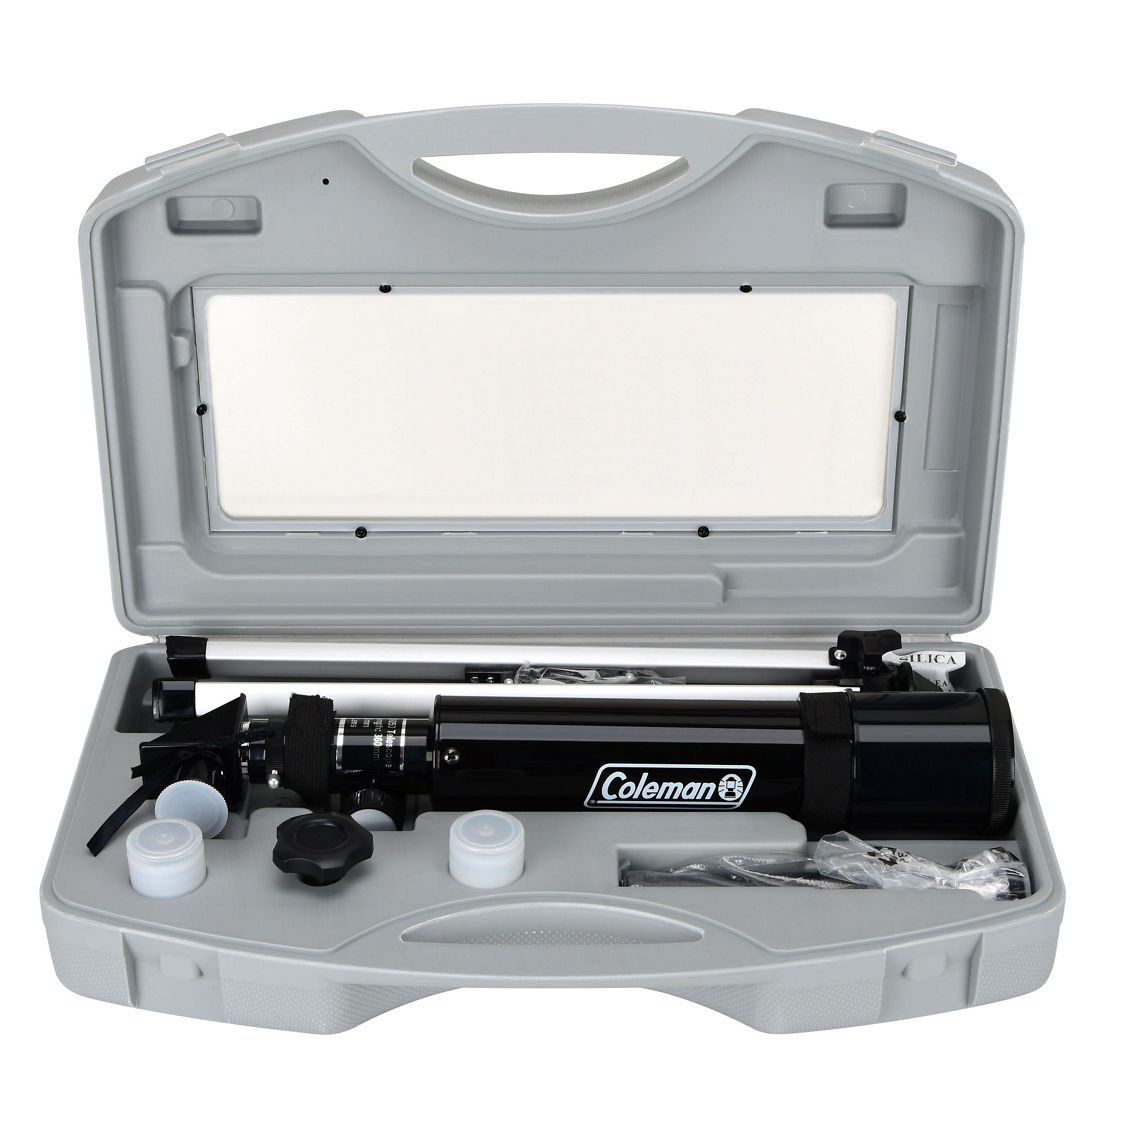 COLEMAN® 360x50 Refractor Telescope Kit with Heavy-Duty Carrying Case - Image 5 of 5